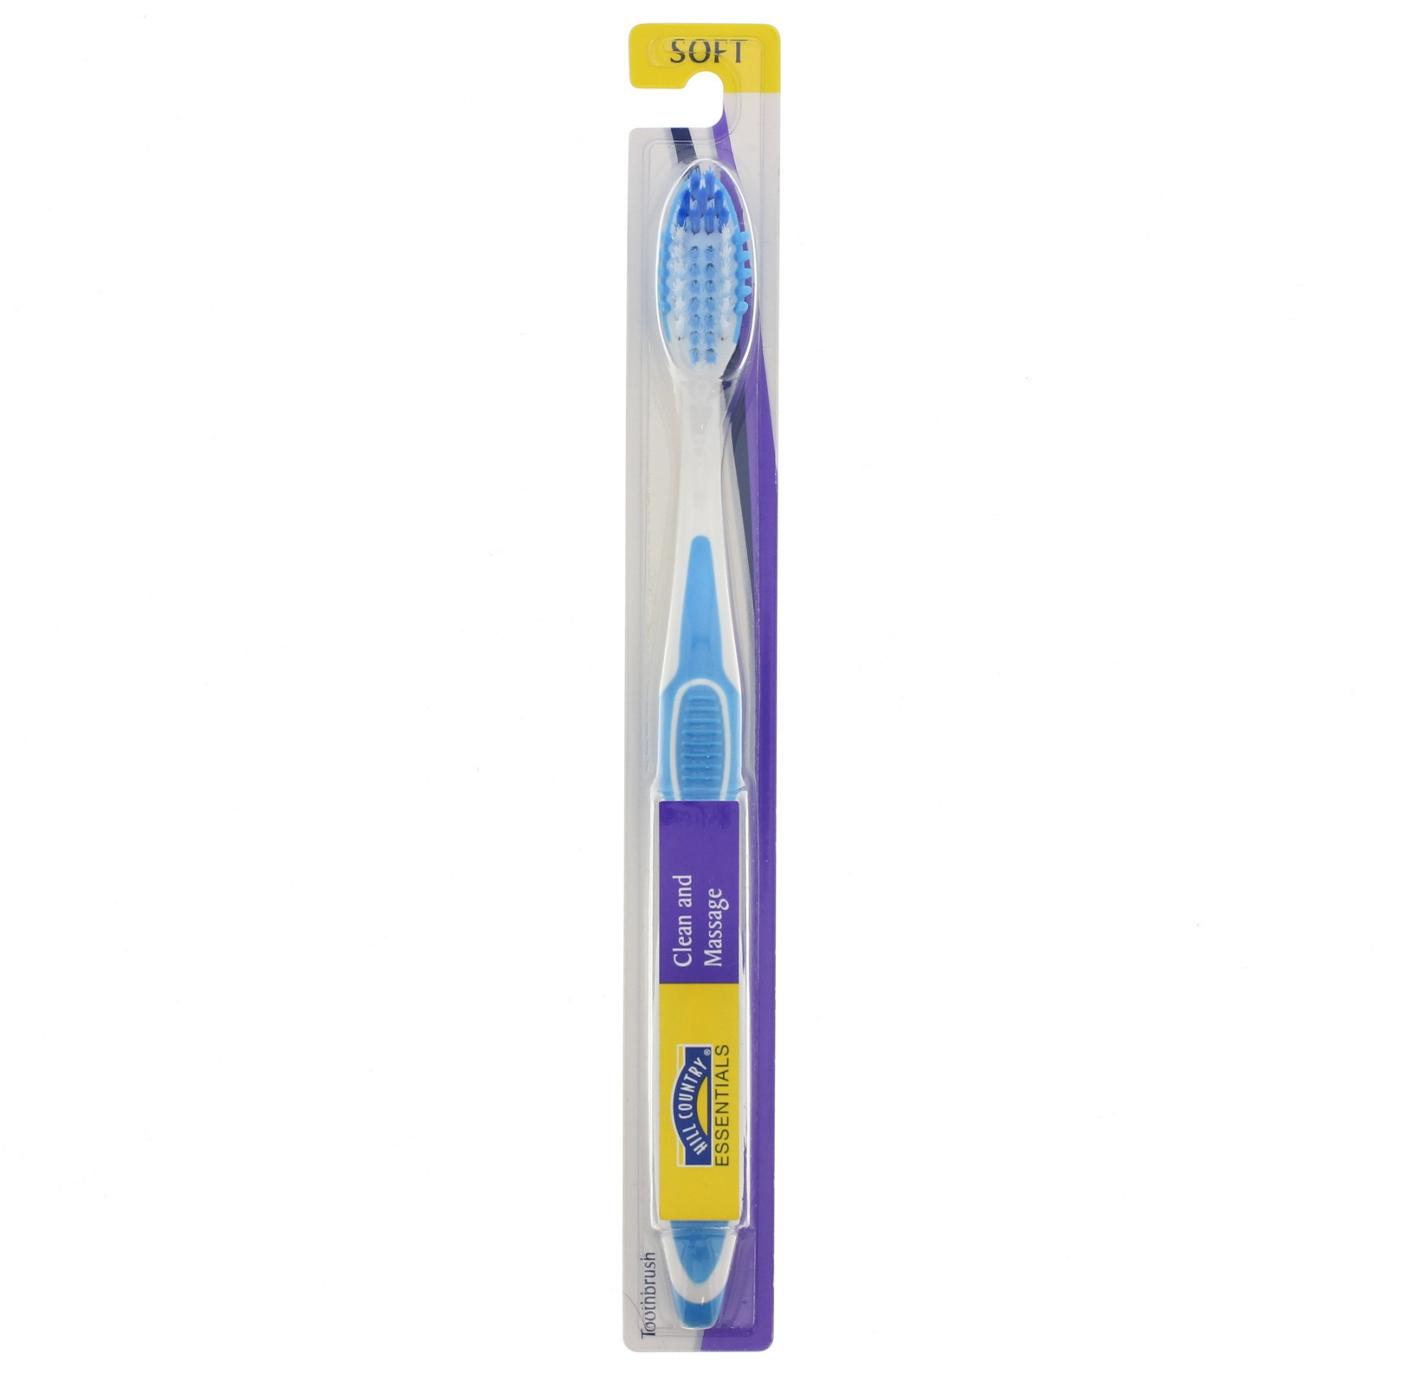 Hill Country Essentials Clean and Massage Soft Toothbrush - Colors May Vary; image 2 of 4